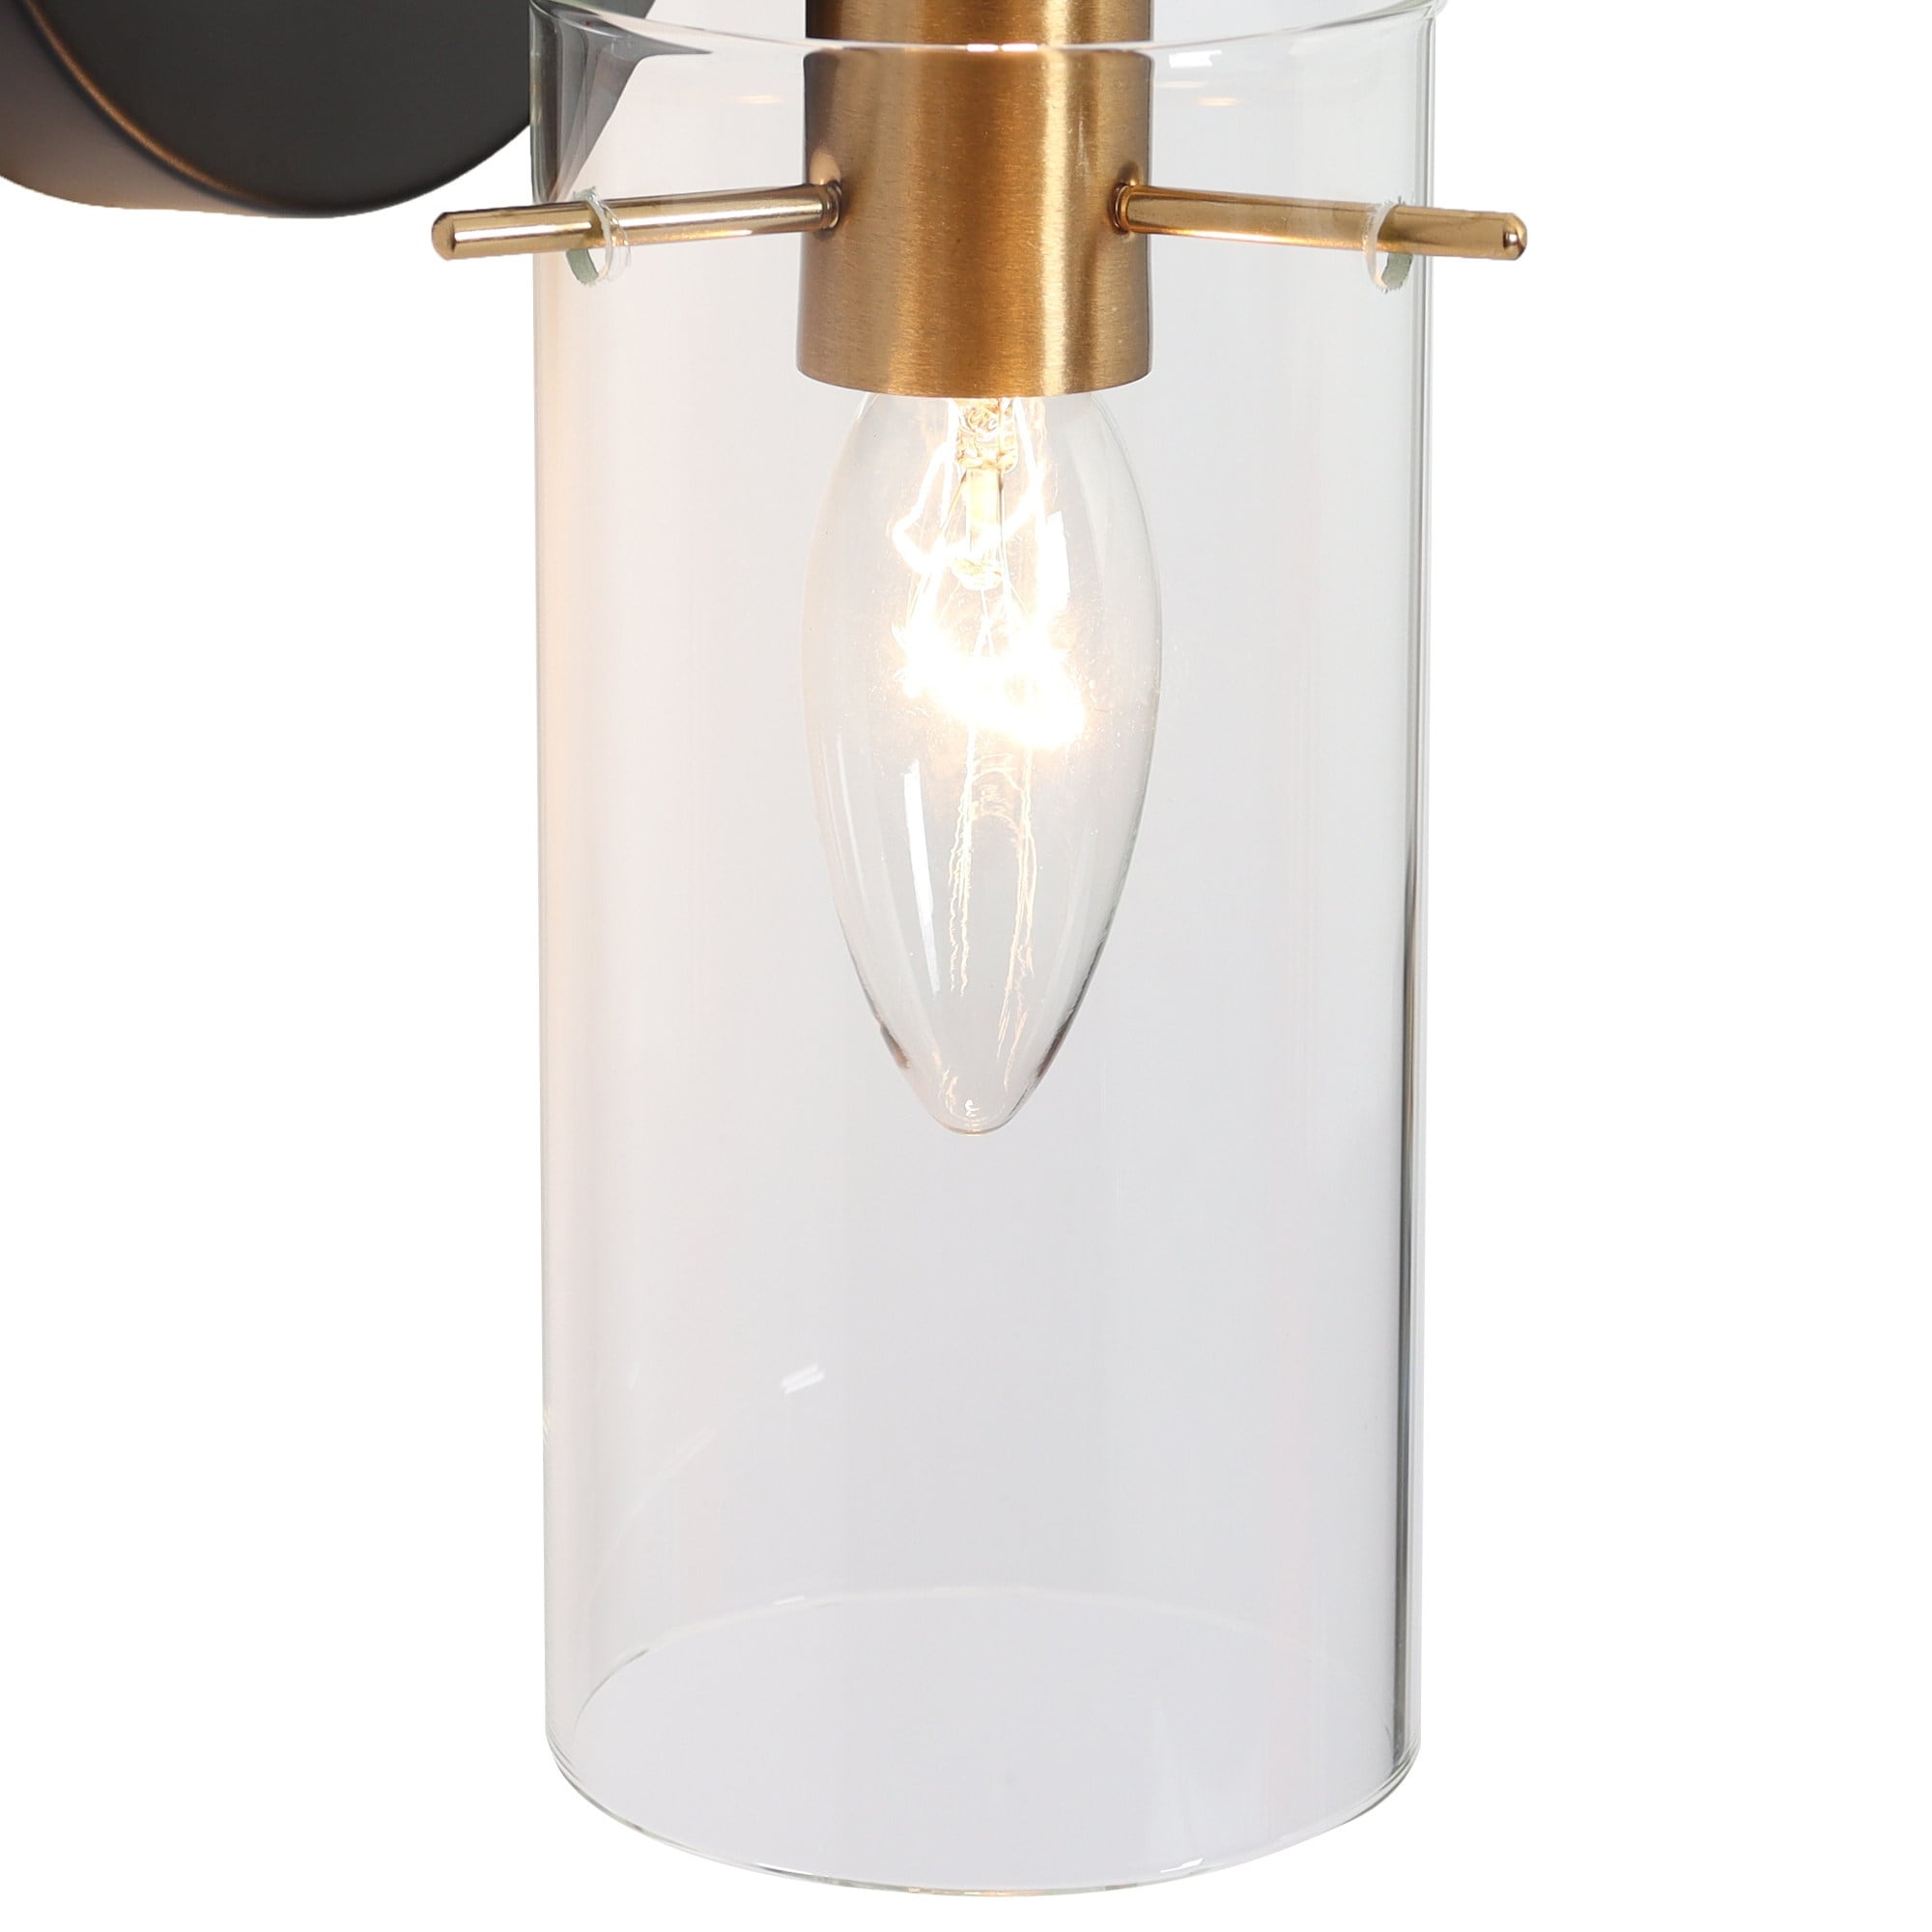 1-Light Modern Black Gold Wall Sconce Light with Glass Shade - 4.7 L x 5  W x 11 H - On Sale - Bed Bath & Beyond - 36241734